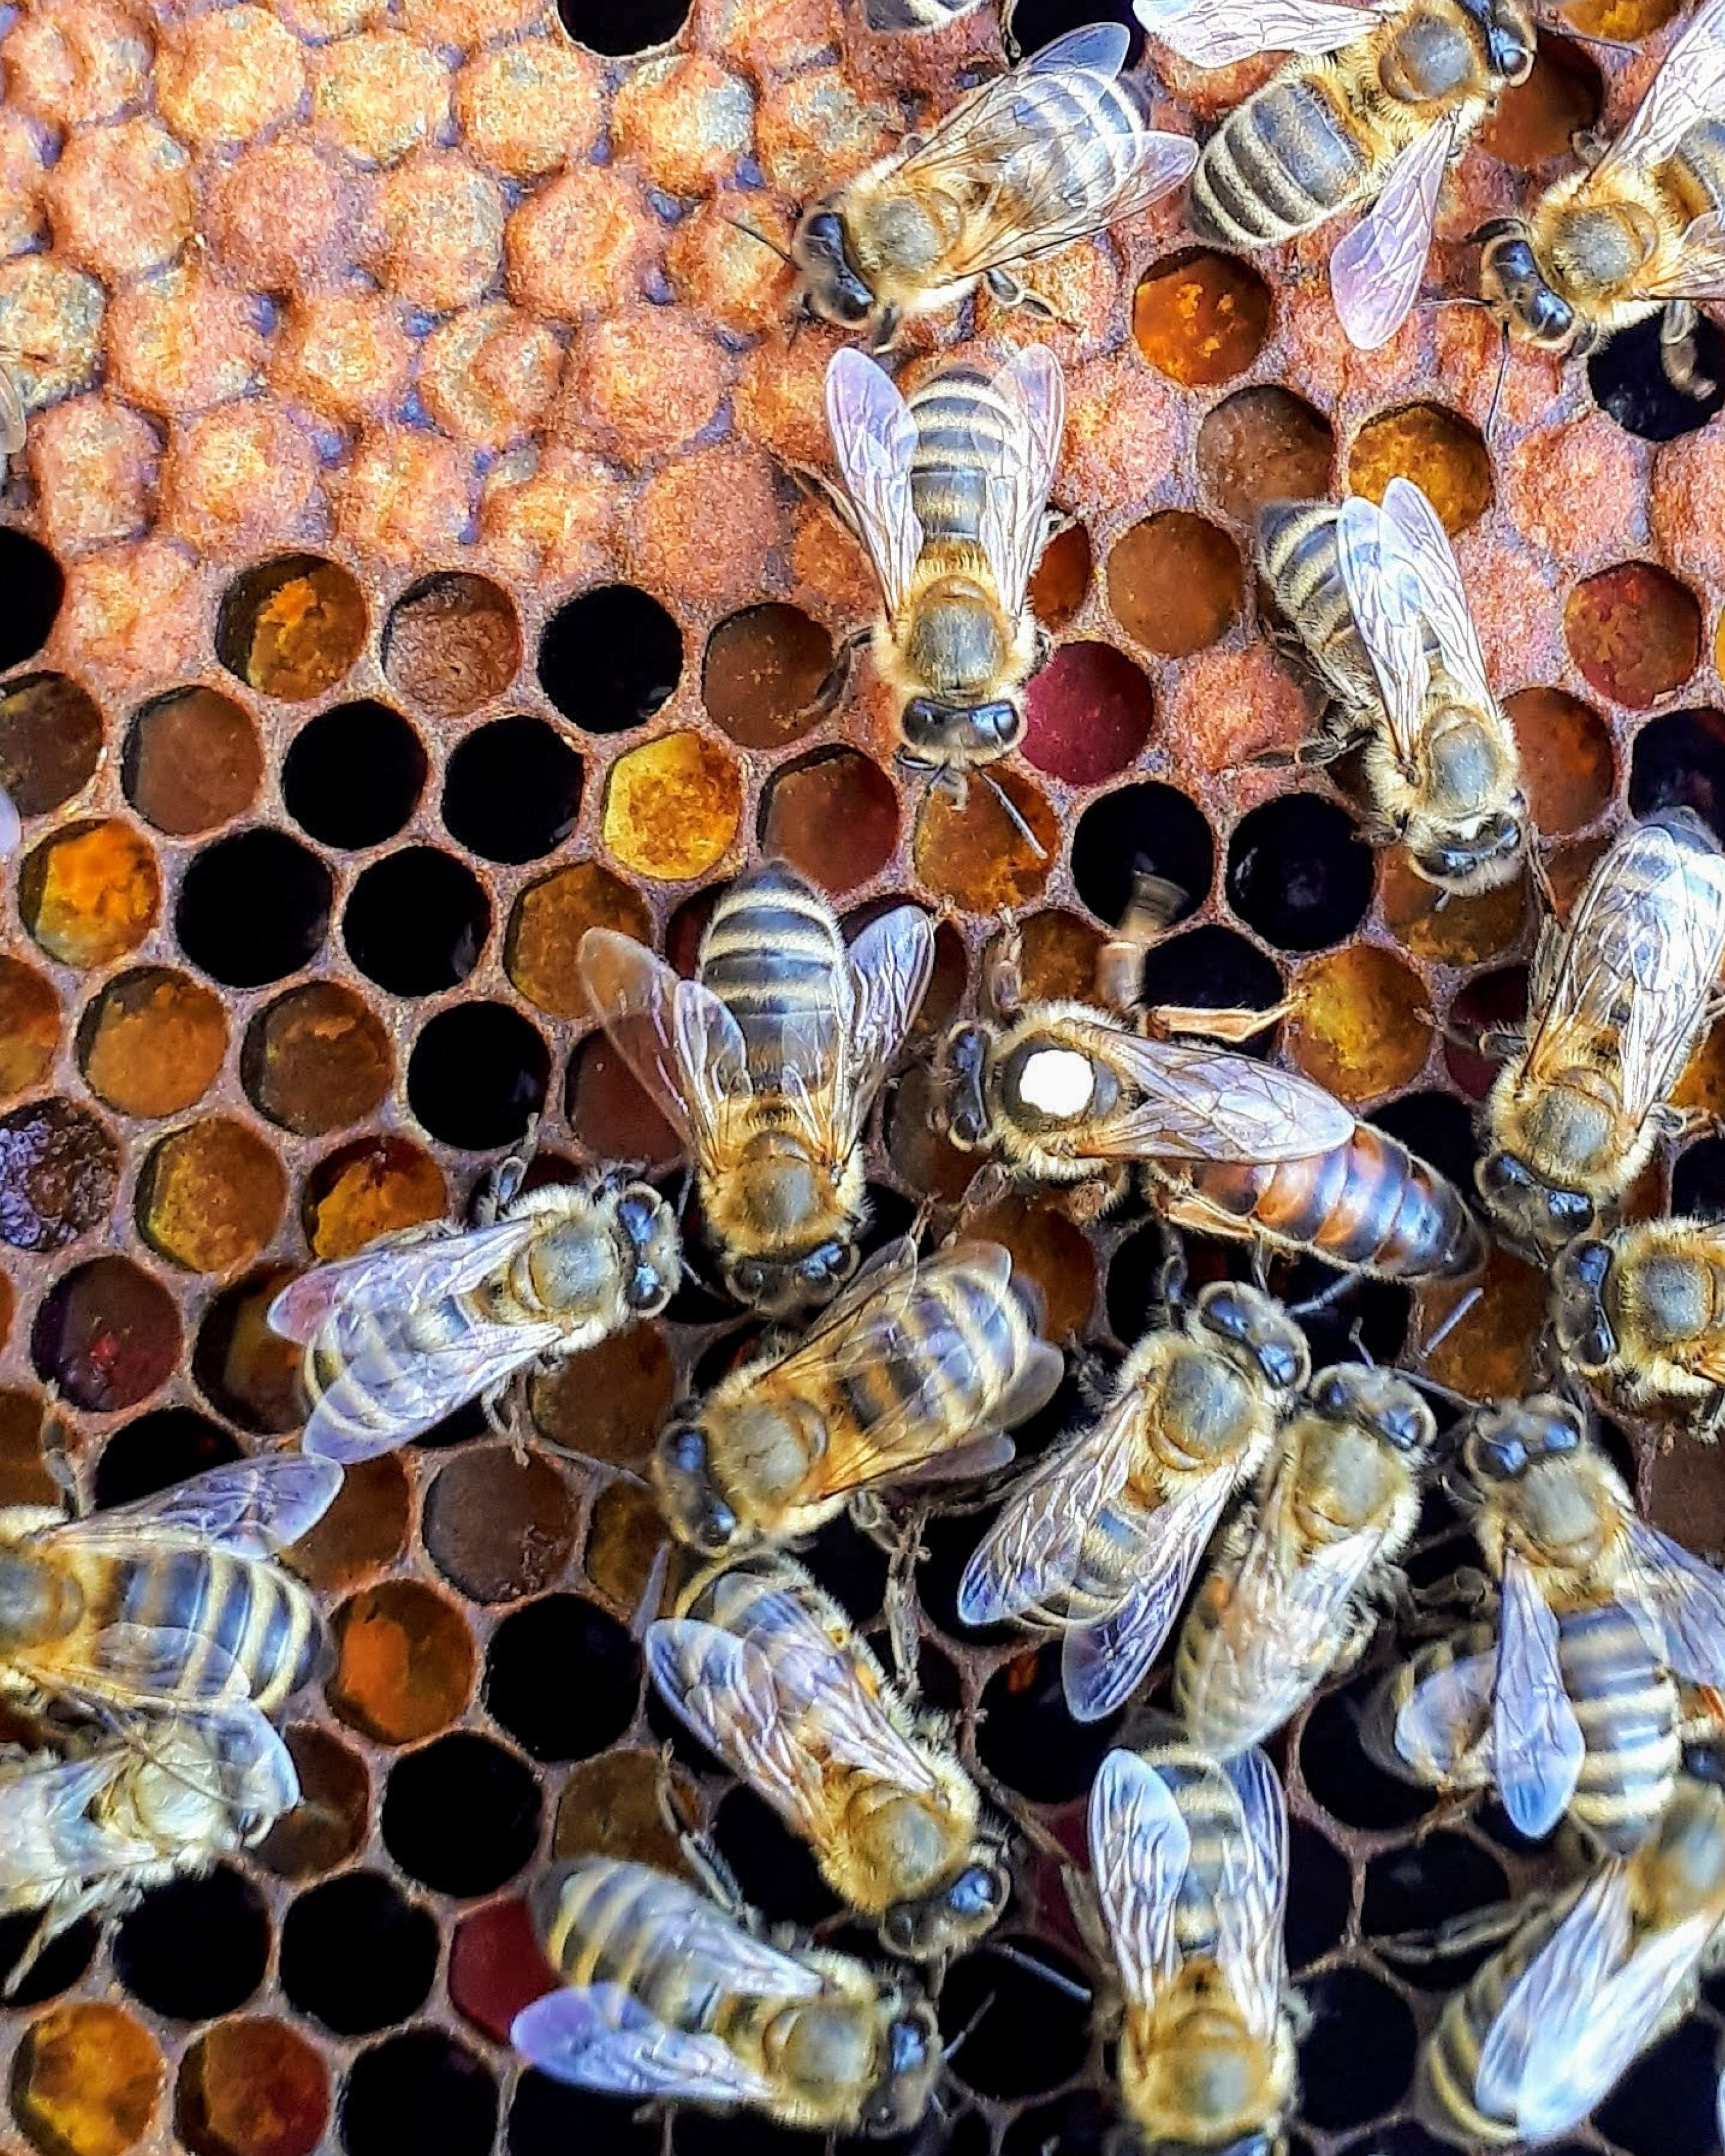 A closeup image of bees on a honeycomb